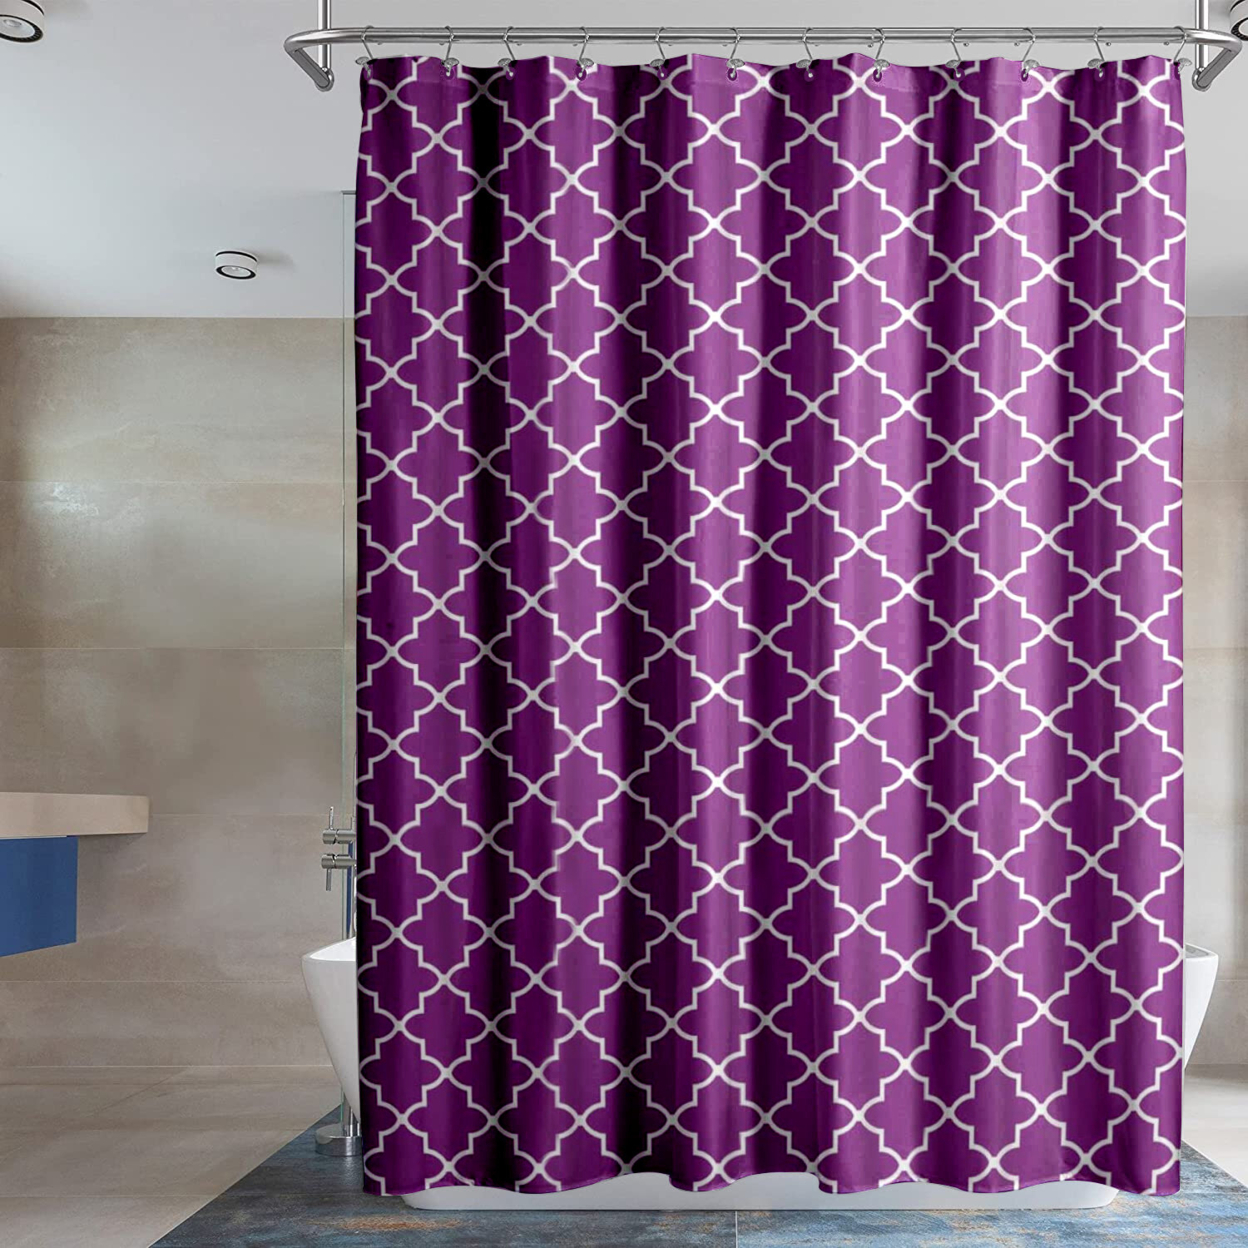 Water-Proof Printed Peva Shower Curtain - 2-Pack, Assorted